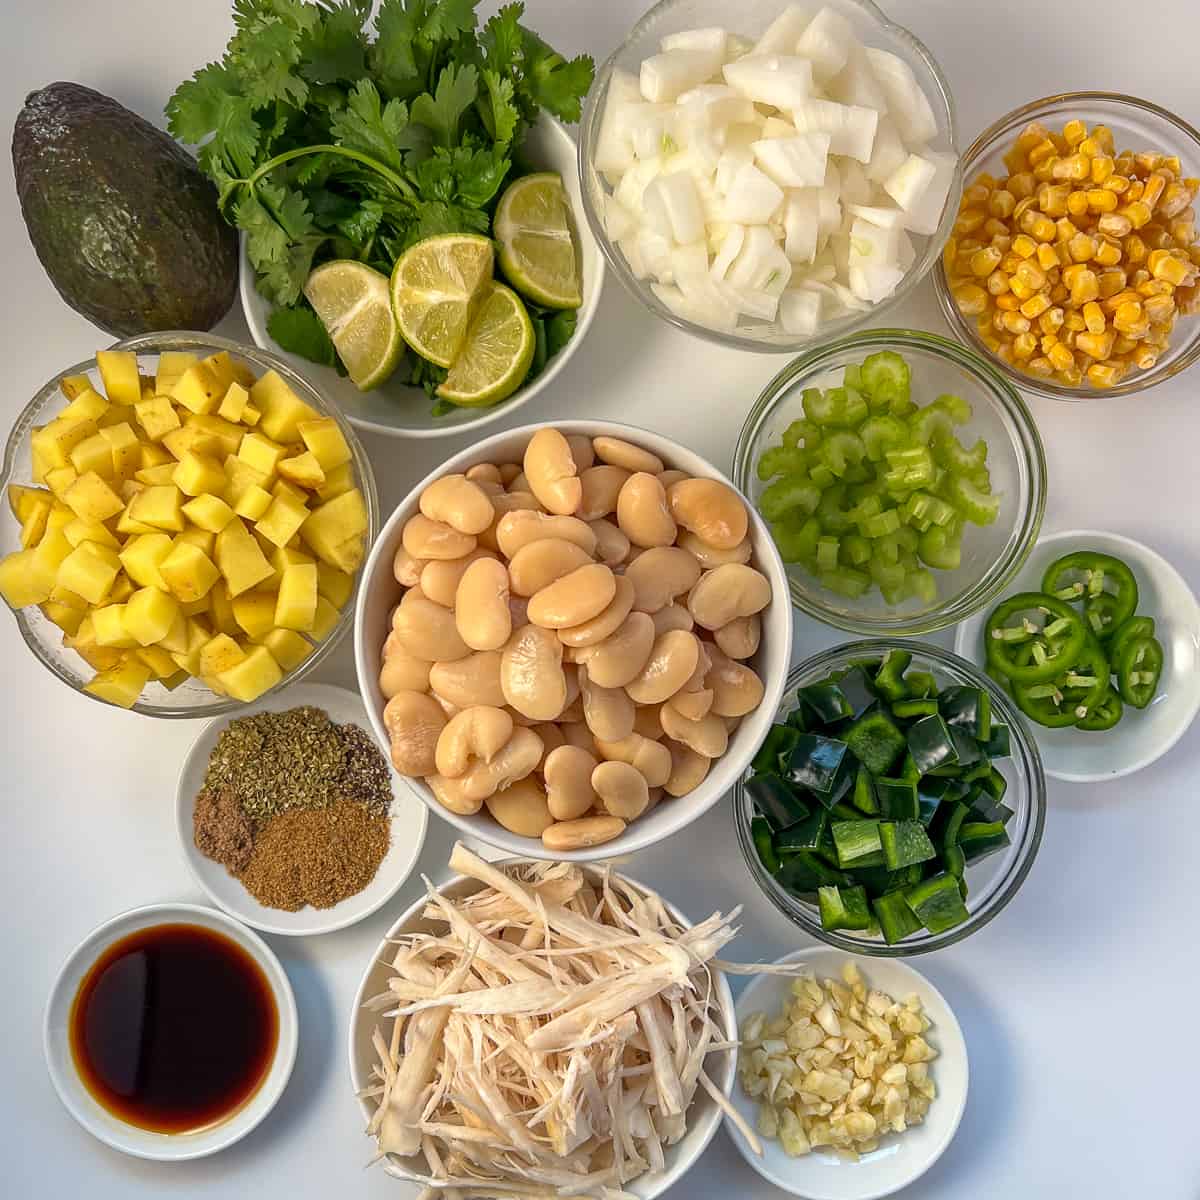 The ingredients for vegan white bean chili: butter beans, shredded oyster mushrooms, diced potatoes, chopped onion, corn, chopped celery, chopped peppers, minced garlic and herbs and spices.